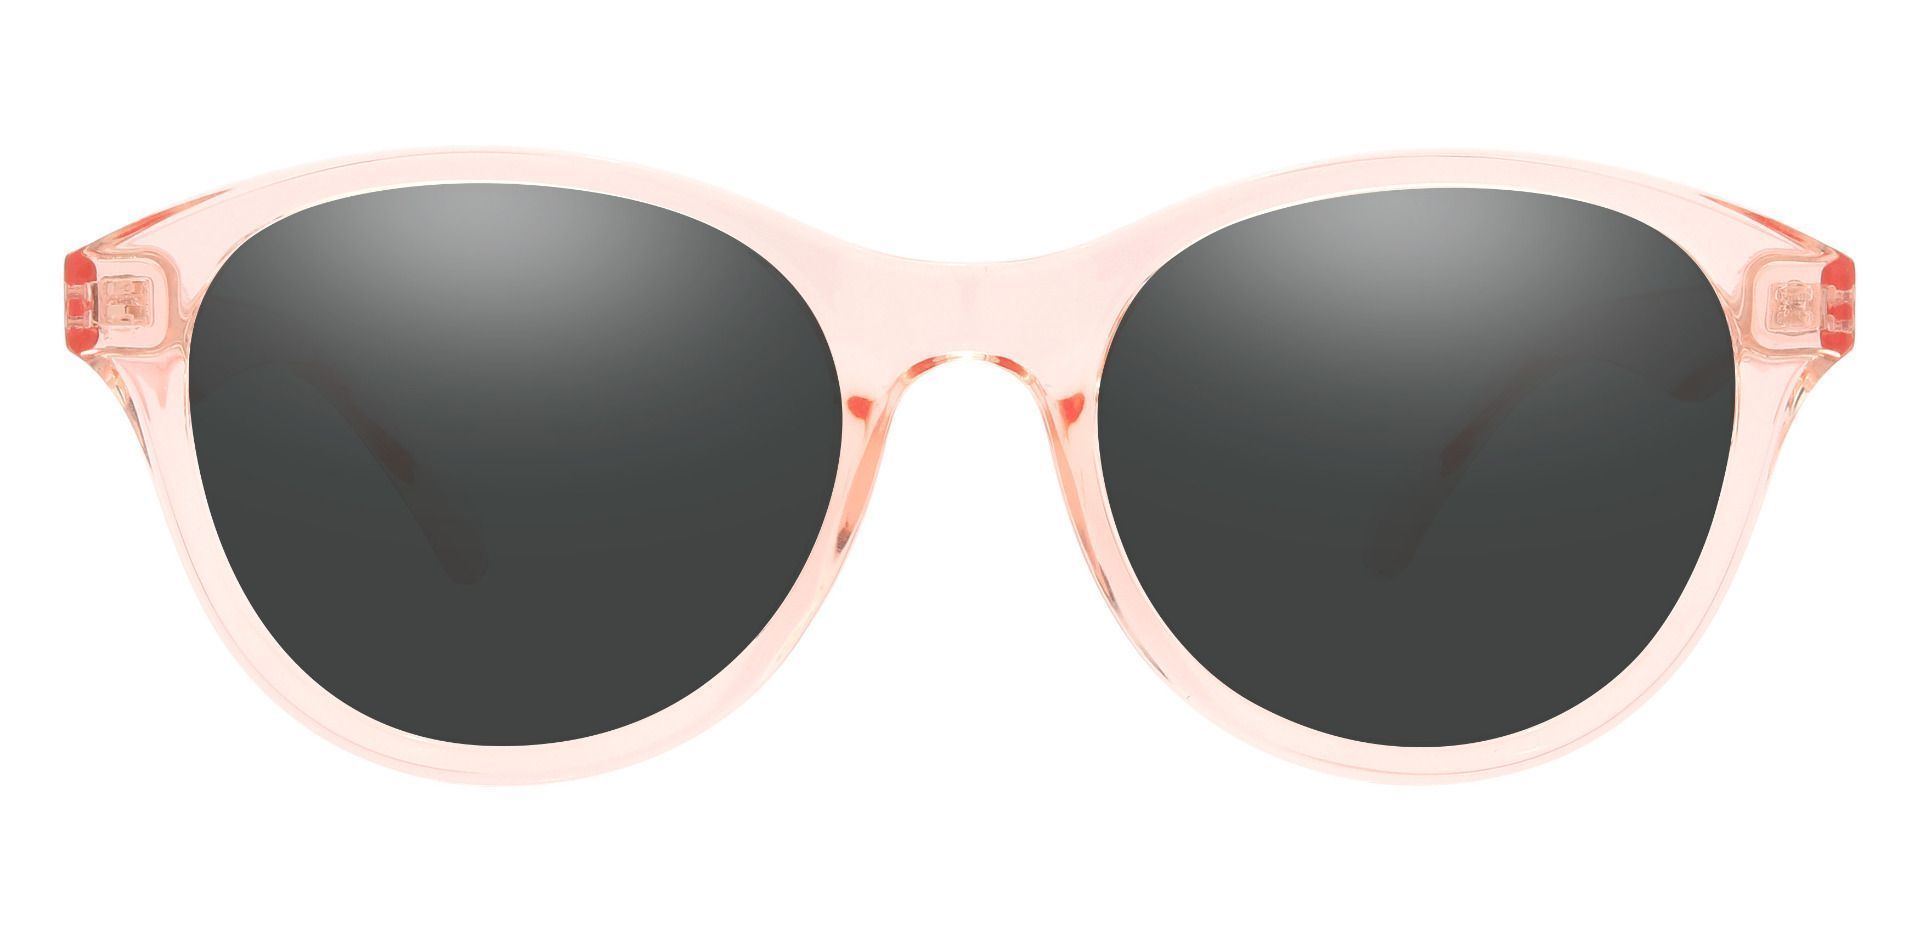 Angelina Round Prescription Sunglasses - Pink Frame With Gray Lenses